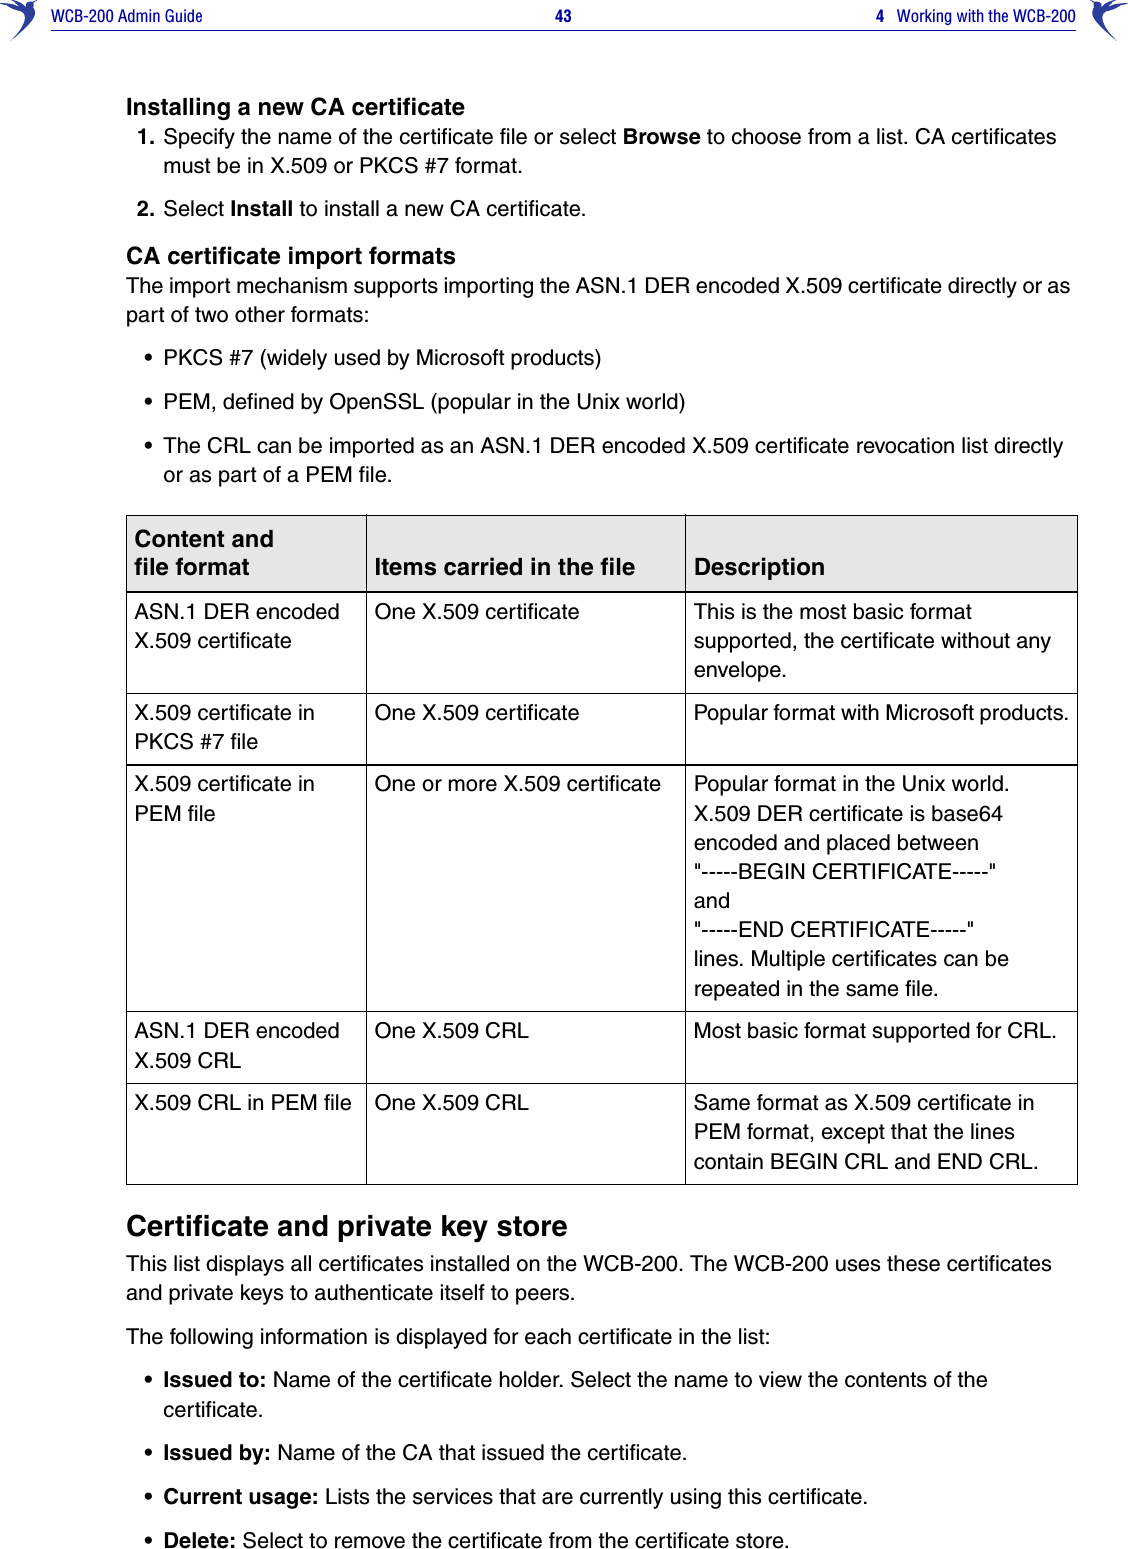 WCB-200 Admin Guide 43 4   Working with the WCB-200Installing a new CA certificate1. Specify the name of the certificate file or select Browse to choose from a list. CA certificates must be in X.509 or PKCS #7 format.2. Select Install to install a new CA certificate.CA certificate import formatsThe import mechanism supports importing the ASN.1 DER encoded X.509 certificate directly or as part of two other formats: •PKCS #7 (widely used by Microsoft products)•PEM, defined by OpenSSL (popular in the Unix world)•The CRL can be imported as an ASN.1 DER encoded X.509 certificate revocation list directly or as part of a PEM file. Certificate and private key storeThis list displays all certificates installed on the WCB-200. The WCB-200 uses these certificates and private keys to authenticate itself to peers.The following information is displayed for each certificate in the list:• Issued to: Name of the certificate holder. Select the name to view the contents of the certificate.• Issued by: Name of the CA that issued the certificate.• Current usage: Lists the services that are currently using this certificate.• Delete: Select to remove the certificate from the certificate store.Content andfile format Items carried in the file DescriptionASN.1 DER encoded X.509 certificateOne X.509 certificate This is the most basic format supported, the certificate without any envelope.X.509 certificate in PKCS #7 fileOne X.509 certificate Popular format with Microsoft products.X.509 certificate in PEM fileOne or more X.509 certificate Popular format in the Unix world. X.509 DER certificate is base64 encoded and placed between&quot;-----BEGIN CERTIFICATE-----&quot; and &quot;-----END CERTIFICATE-----&quot; lines. Multiple certificates can be repeated in the same file.ASN.1 DER encoded X.509 CRLOne X.509 CRL Most basic format supported for CRL.X.509 CRL in PEM file One X.509 CRL Same format as X.509 certificate in PEM format, except that the lines contain BEGIN CRL and END CRL.